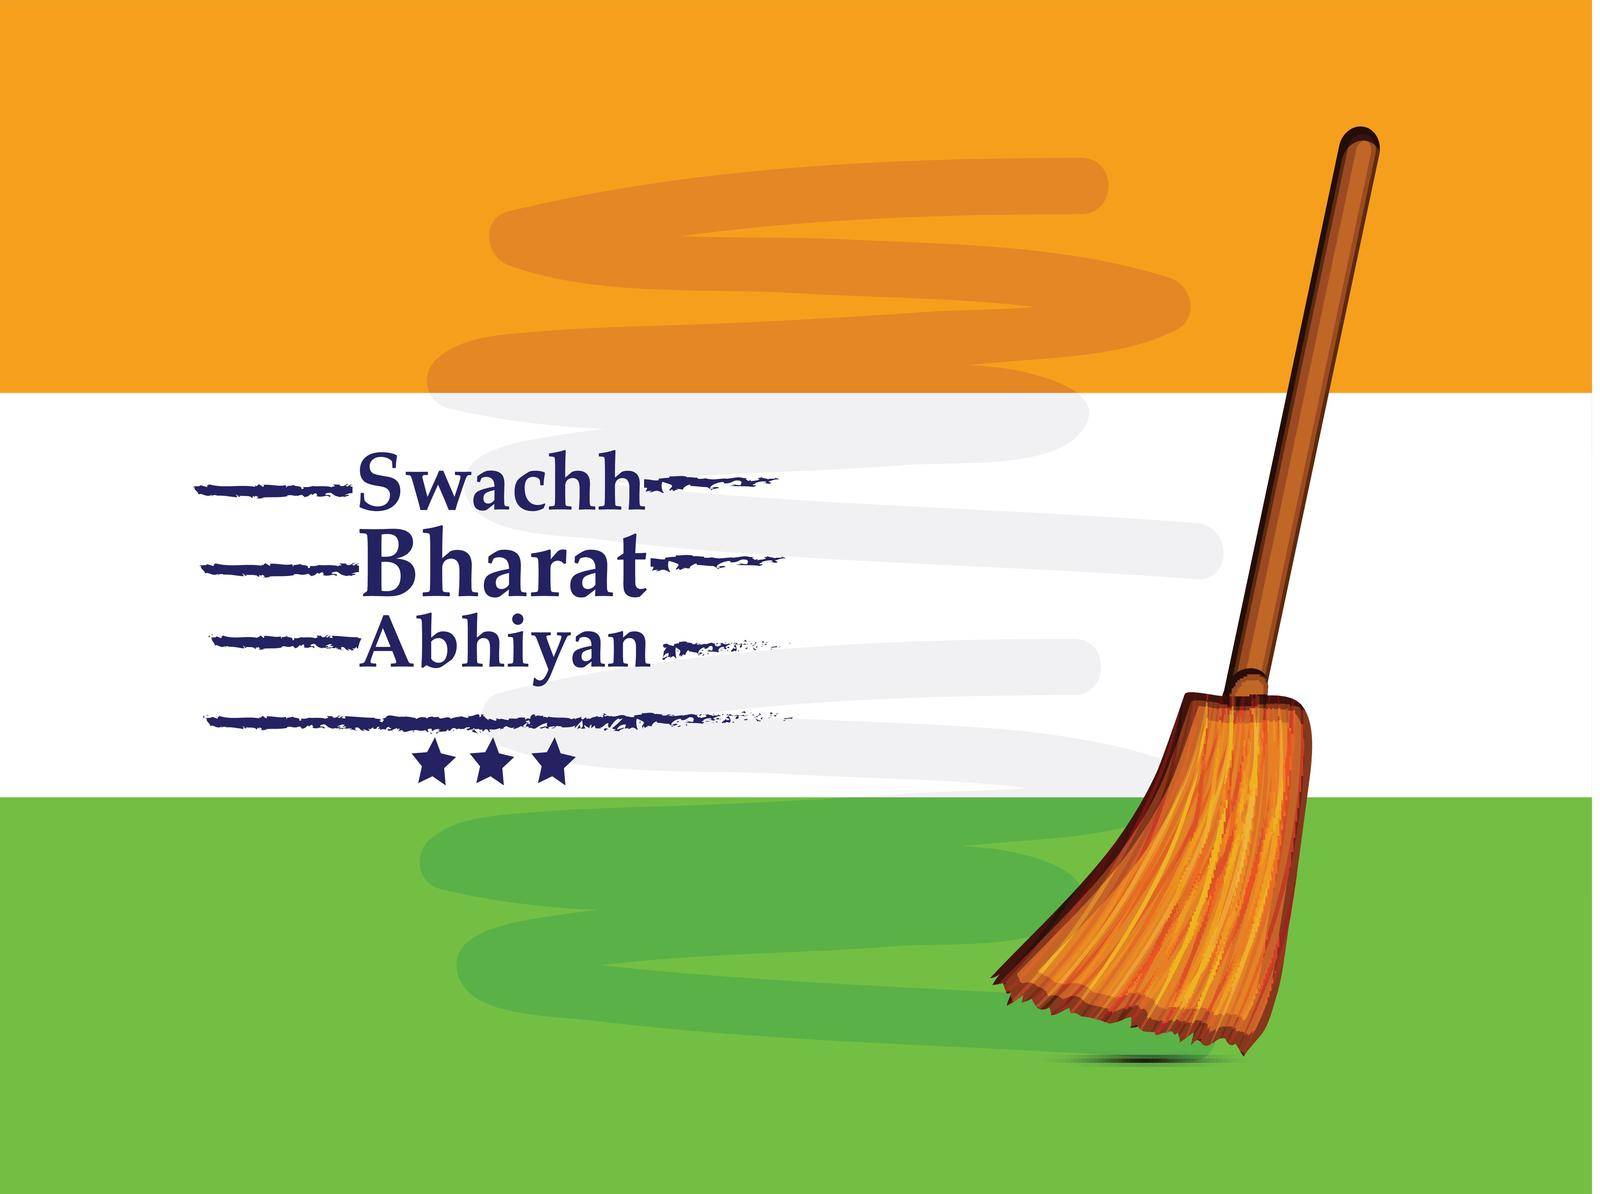 Swachh Bharat Abhiyan or Clean India Mission by vectorworld